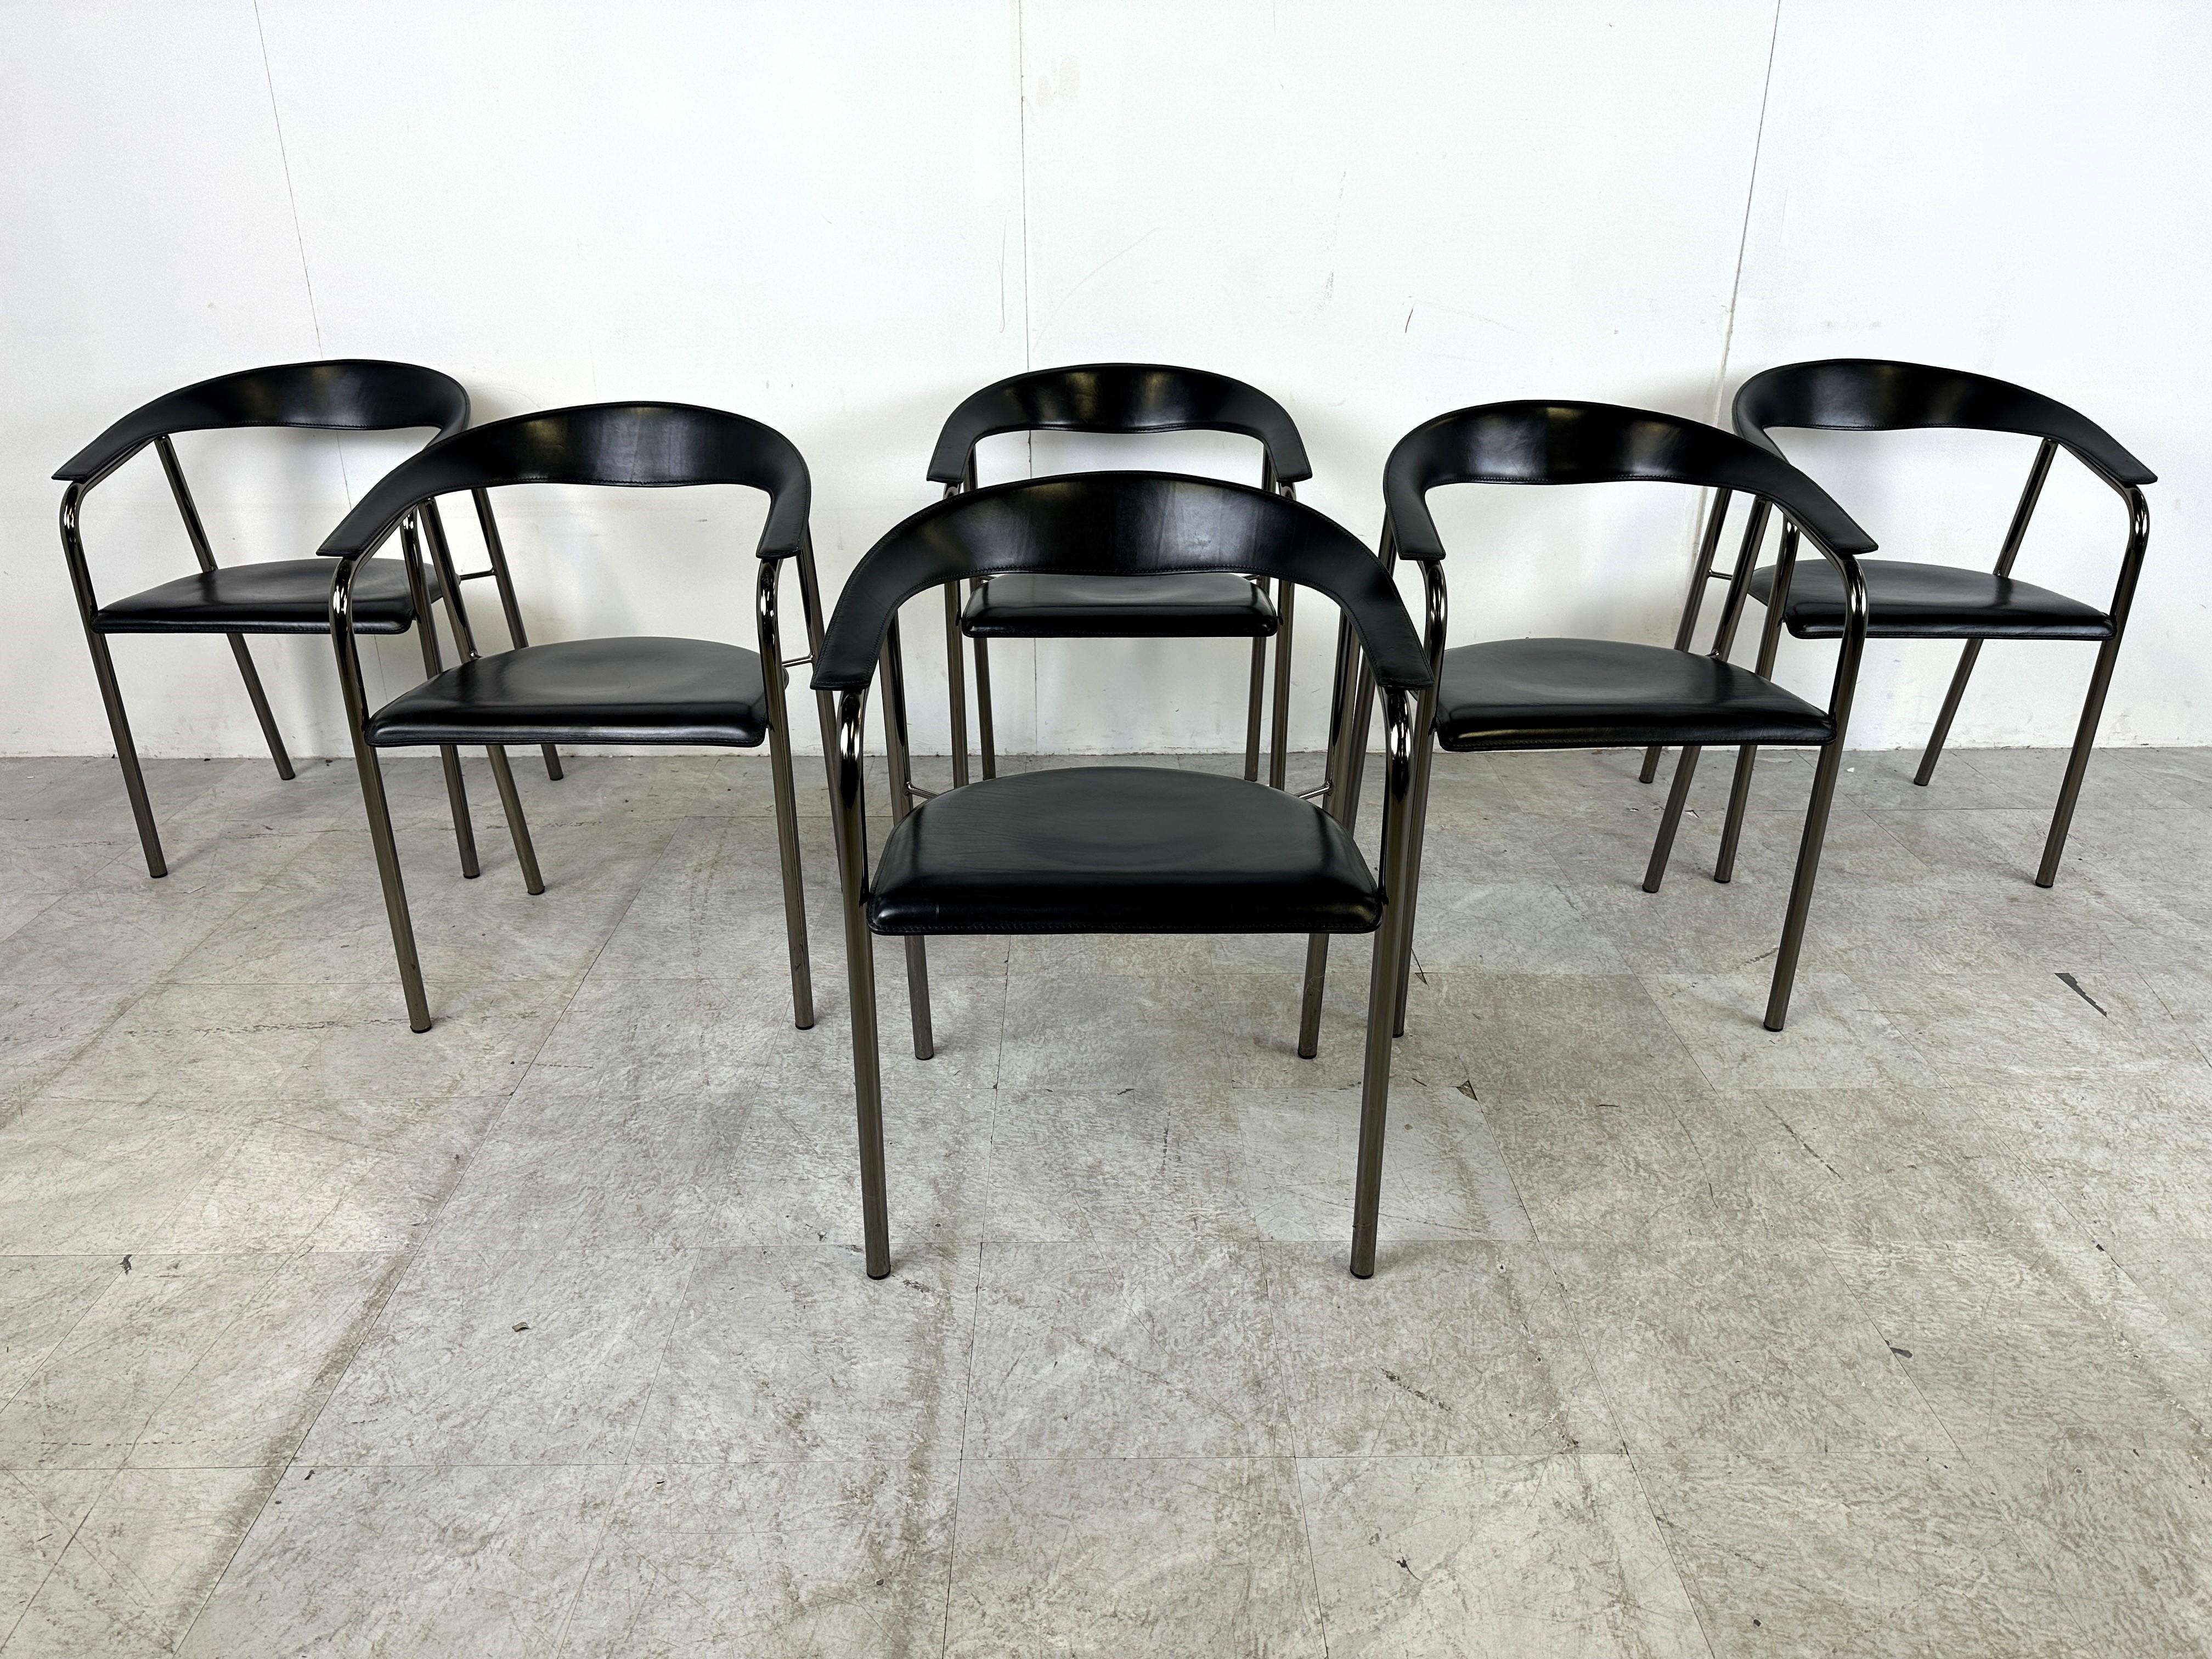 Set of 6 black leather armchairs by Arrben Italy.

Beautiful curved backrests forming the armrests in leather, with leather seats and a black metal frame.

The chairs are stamped underneath the seats with 'Arrben Italy'.

Very good condition

1980s